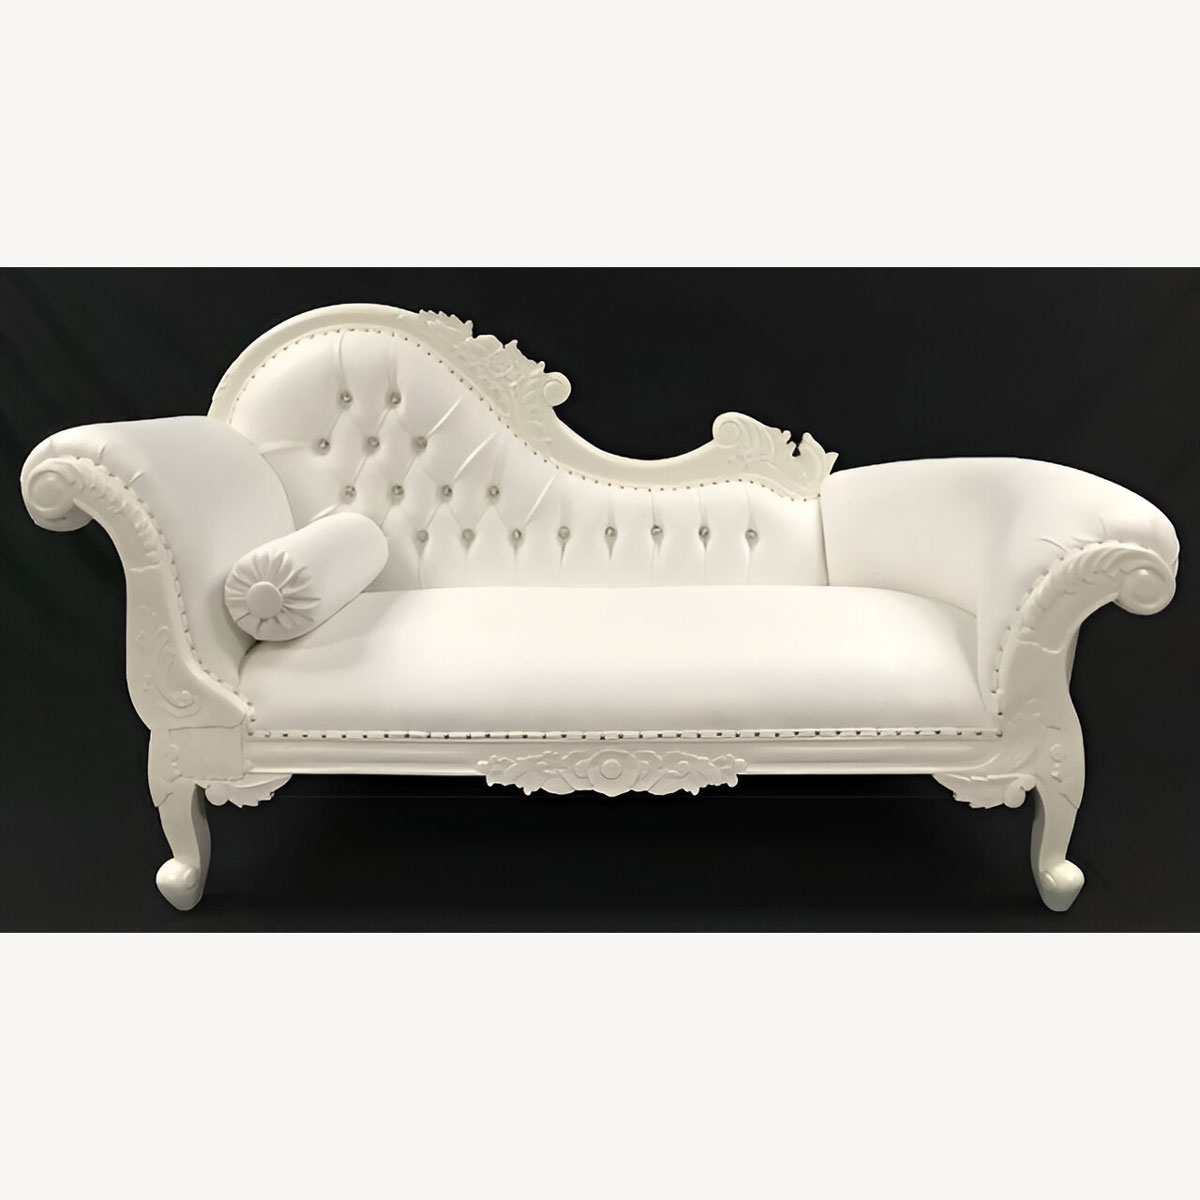 Hampshire Chaise In Gloss Lacquered White With Bright White Faux Leather With Crystals 1 - Hampshire Barn Interiors - Home - Hampshire Barn Interiors News